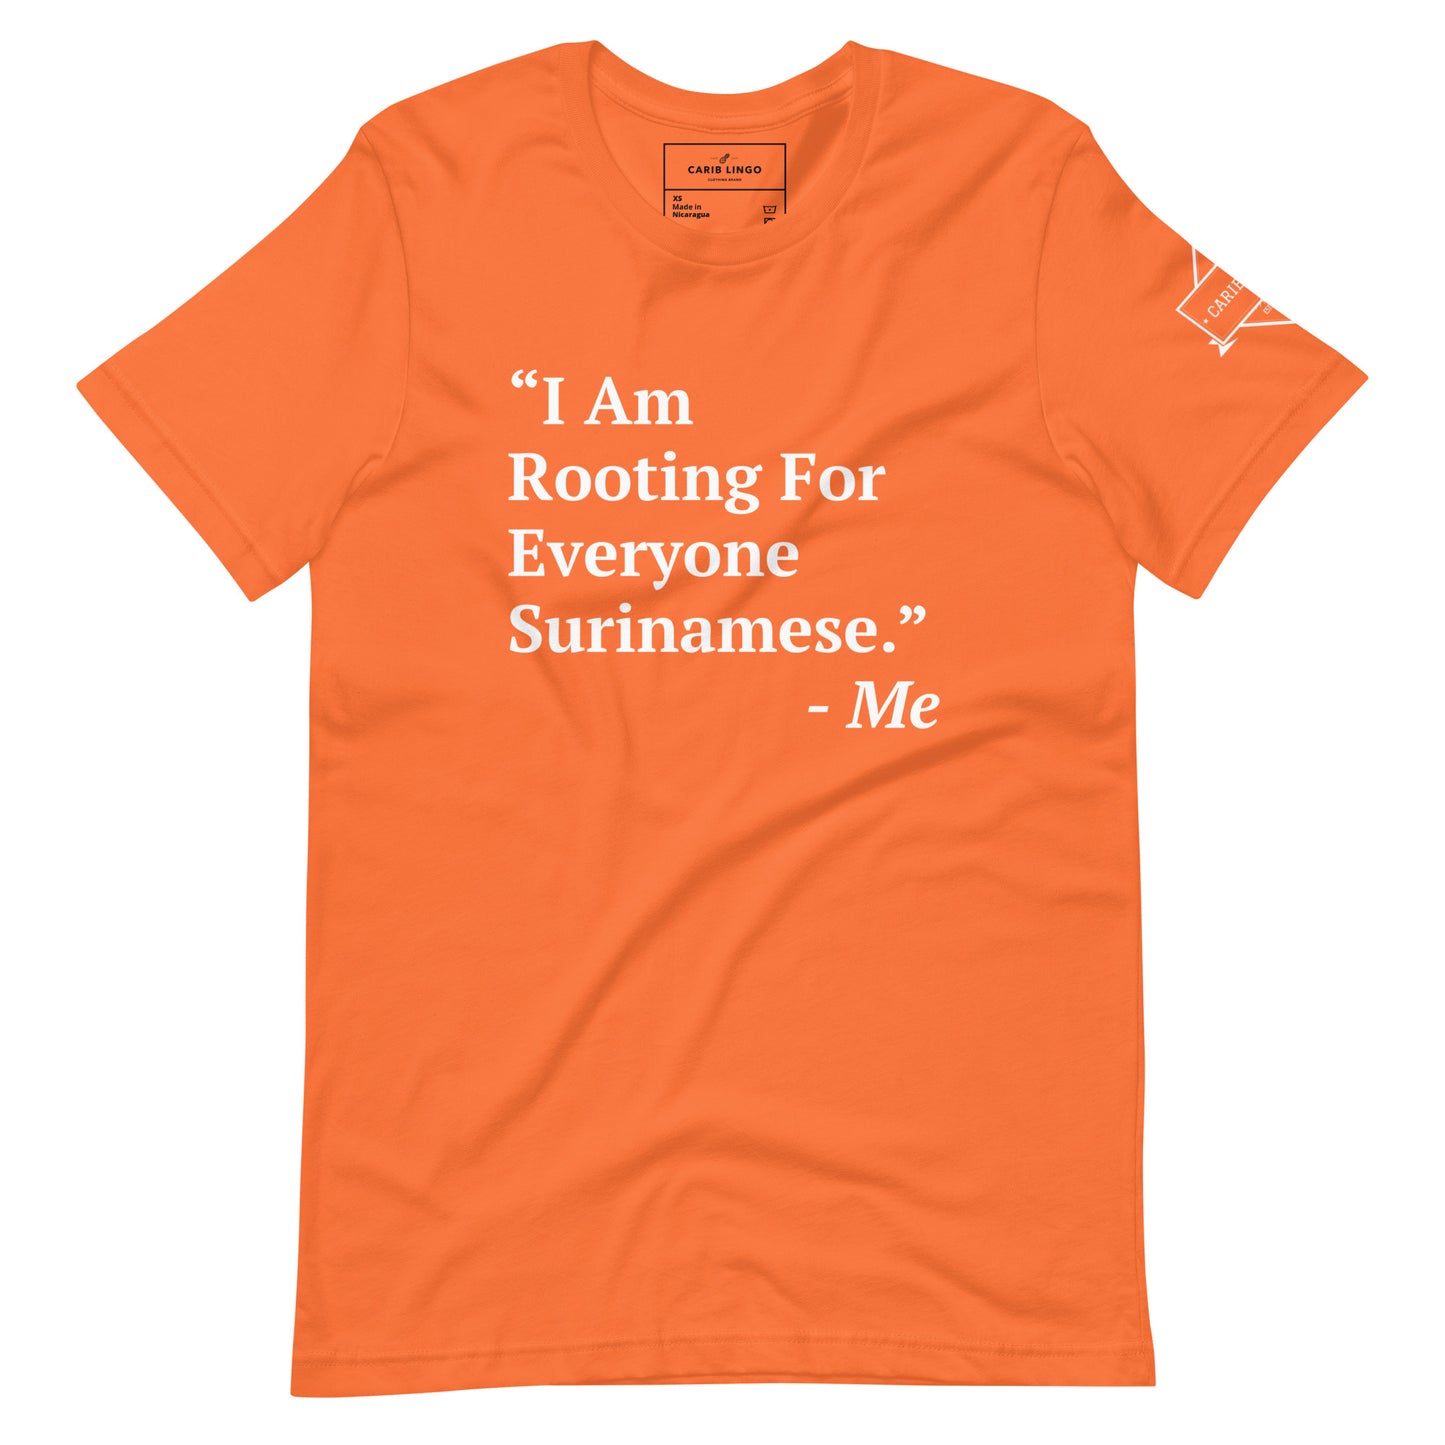 I Am Rooting: Suriname Unisex t-shirt